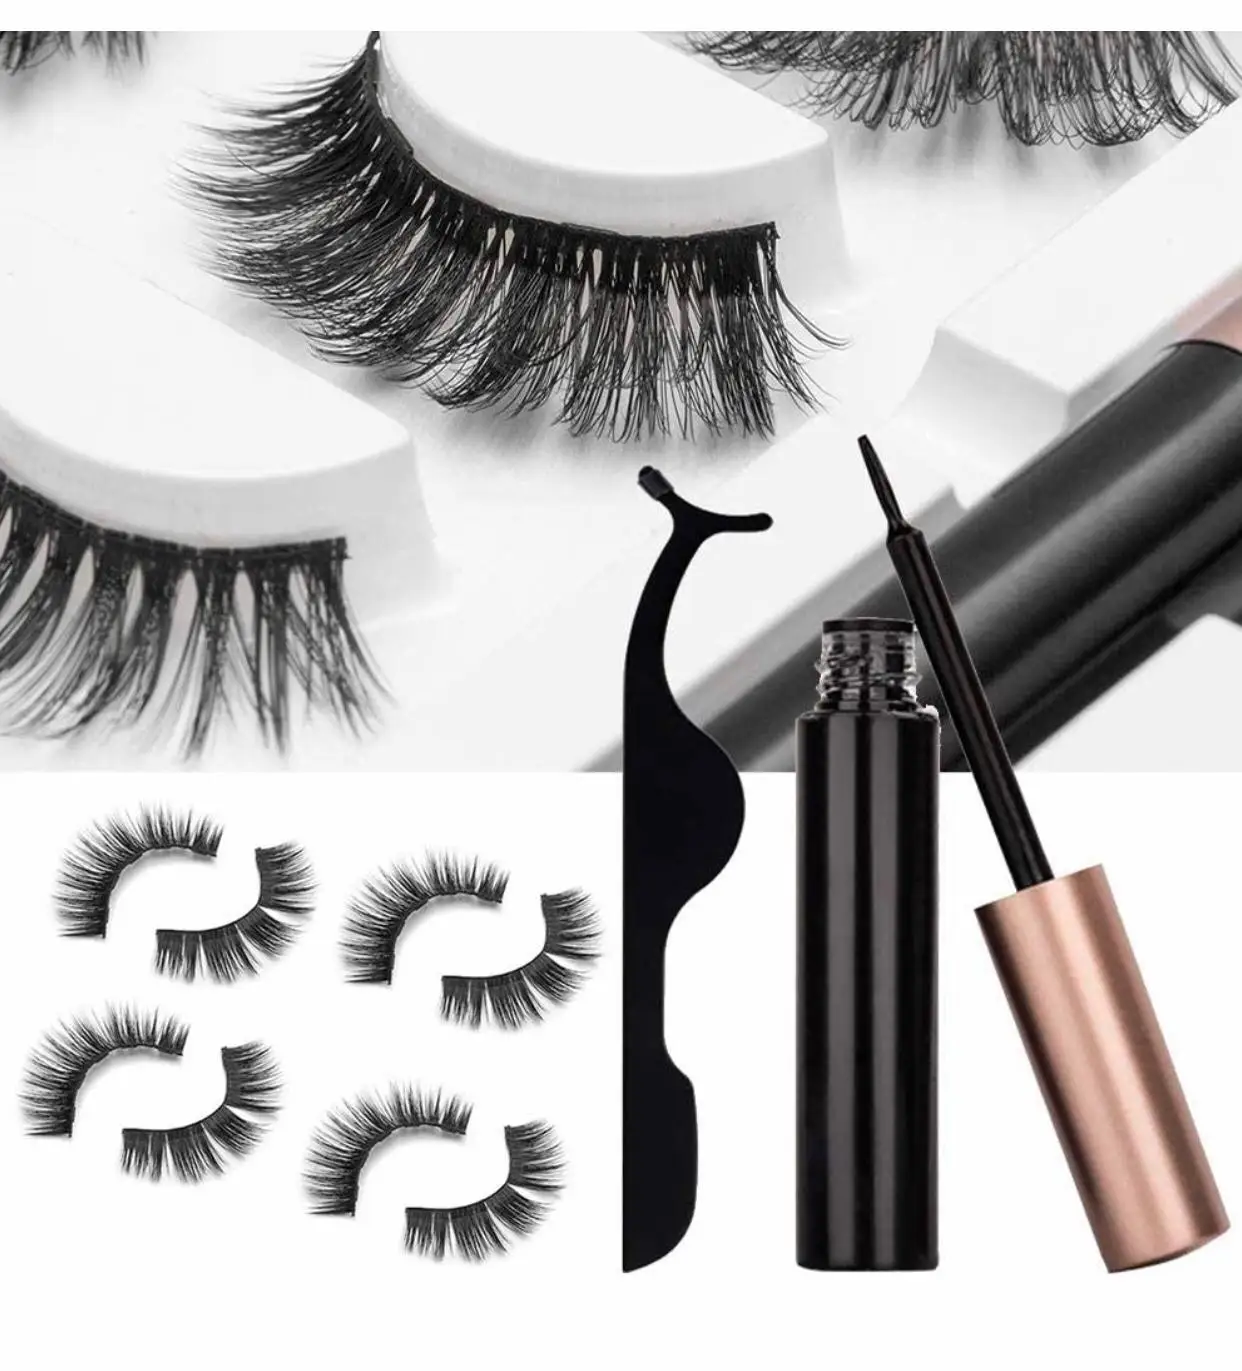 

Magnetic Eyelashes 5 magnets Mink or Synthetic Magnetic Lashes With Eyeliner Kit Private Label Packaging, Natural black